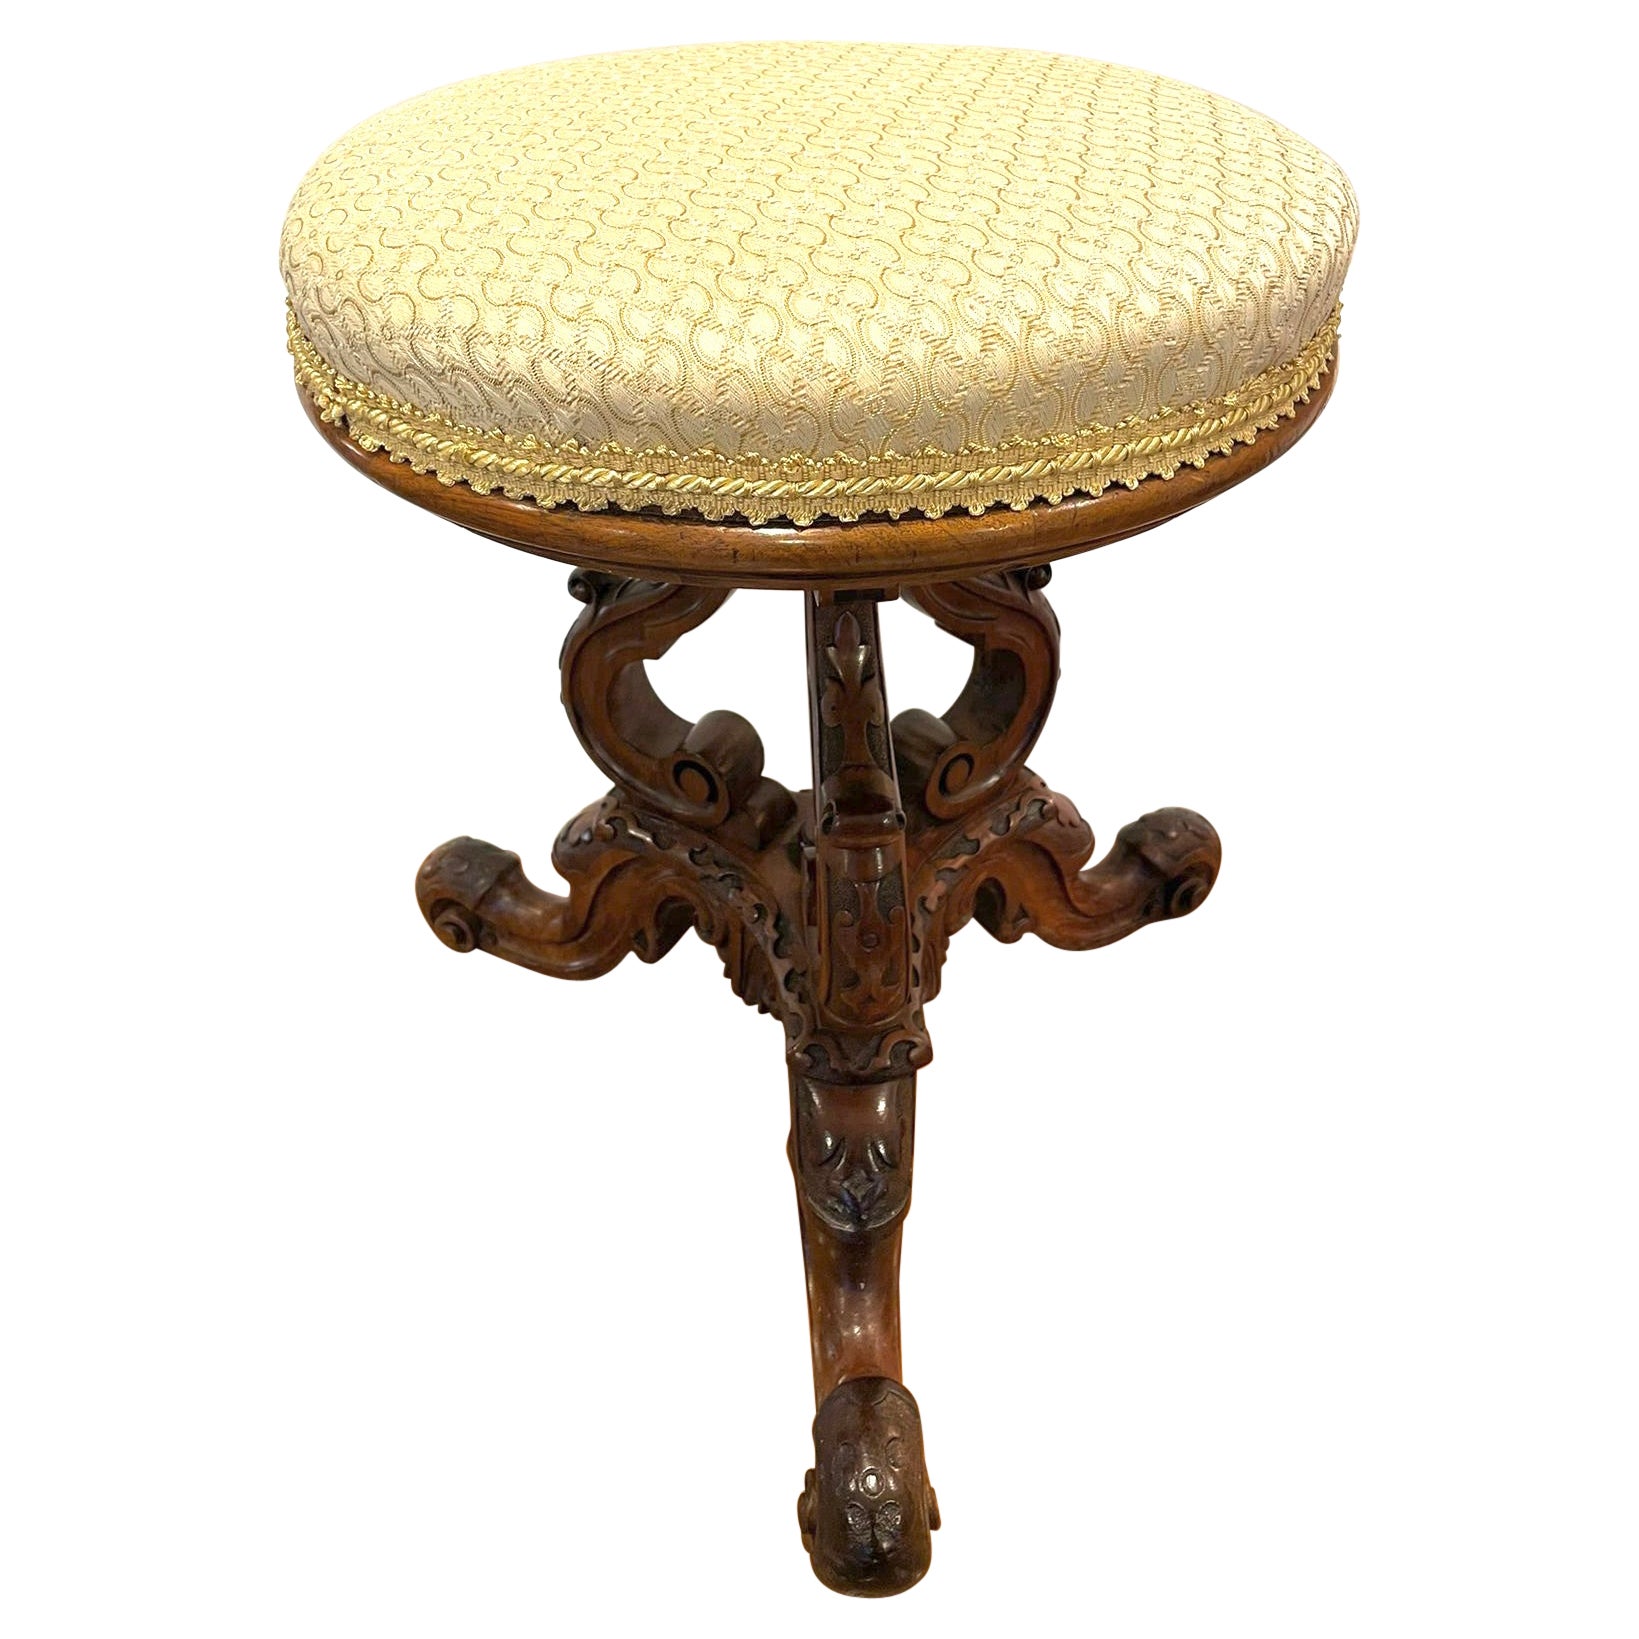 Outstanding Quality Antique Victorian Carved Walnut Stool